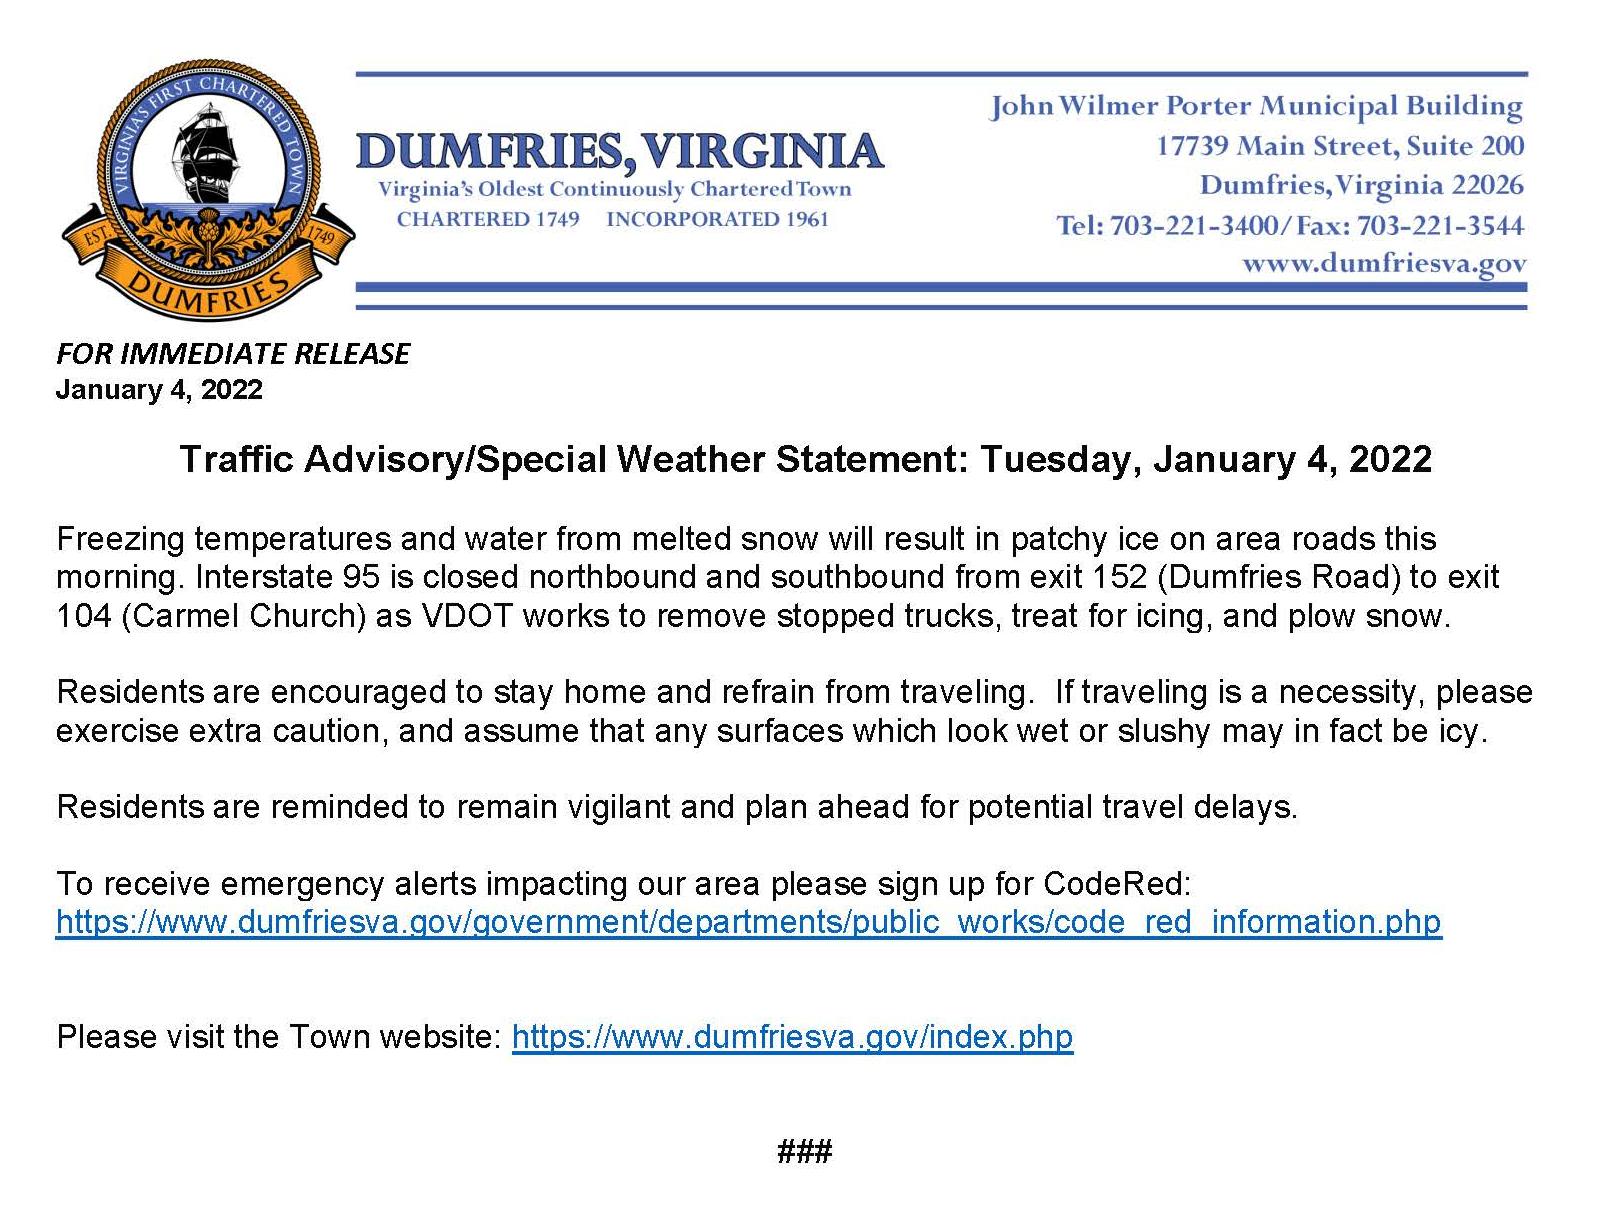 Traffic Advisory - Special Weather Statement January 4 2022 - Copy